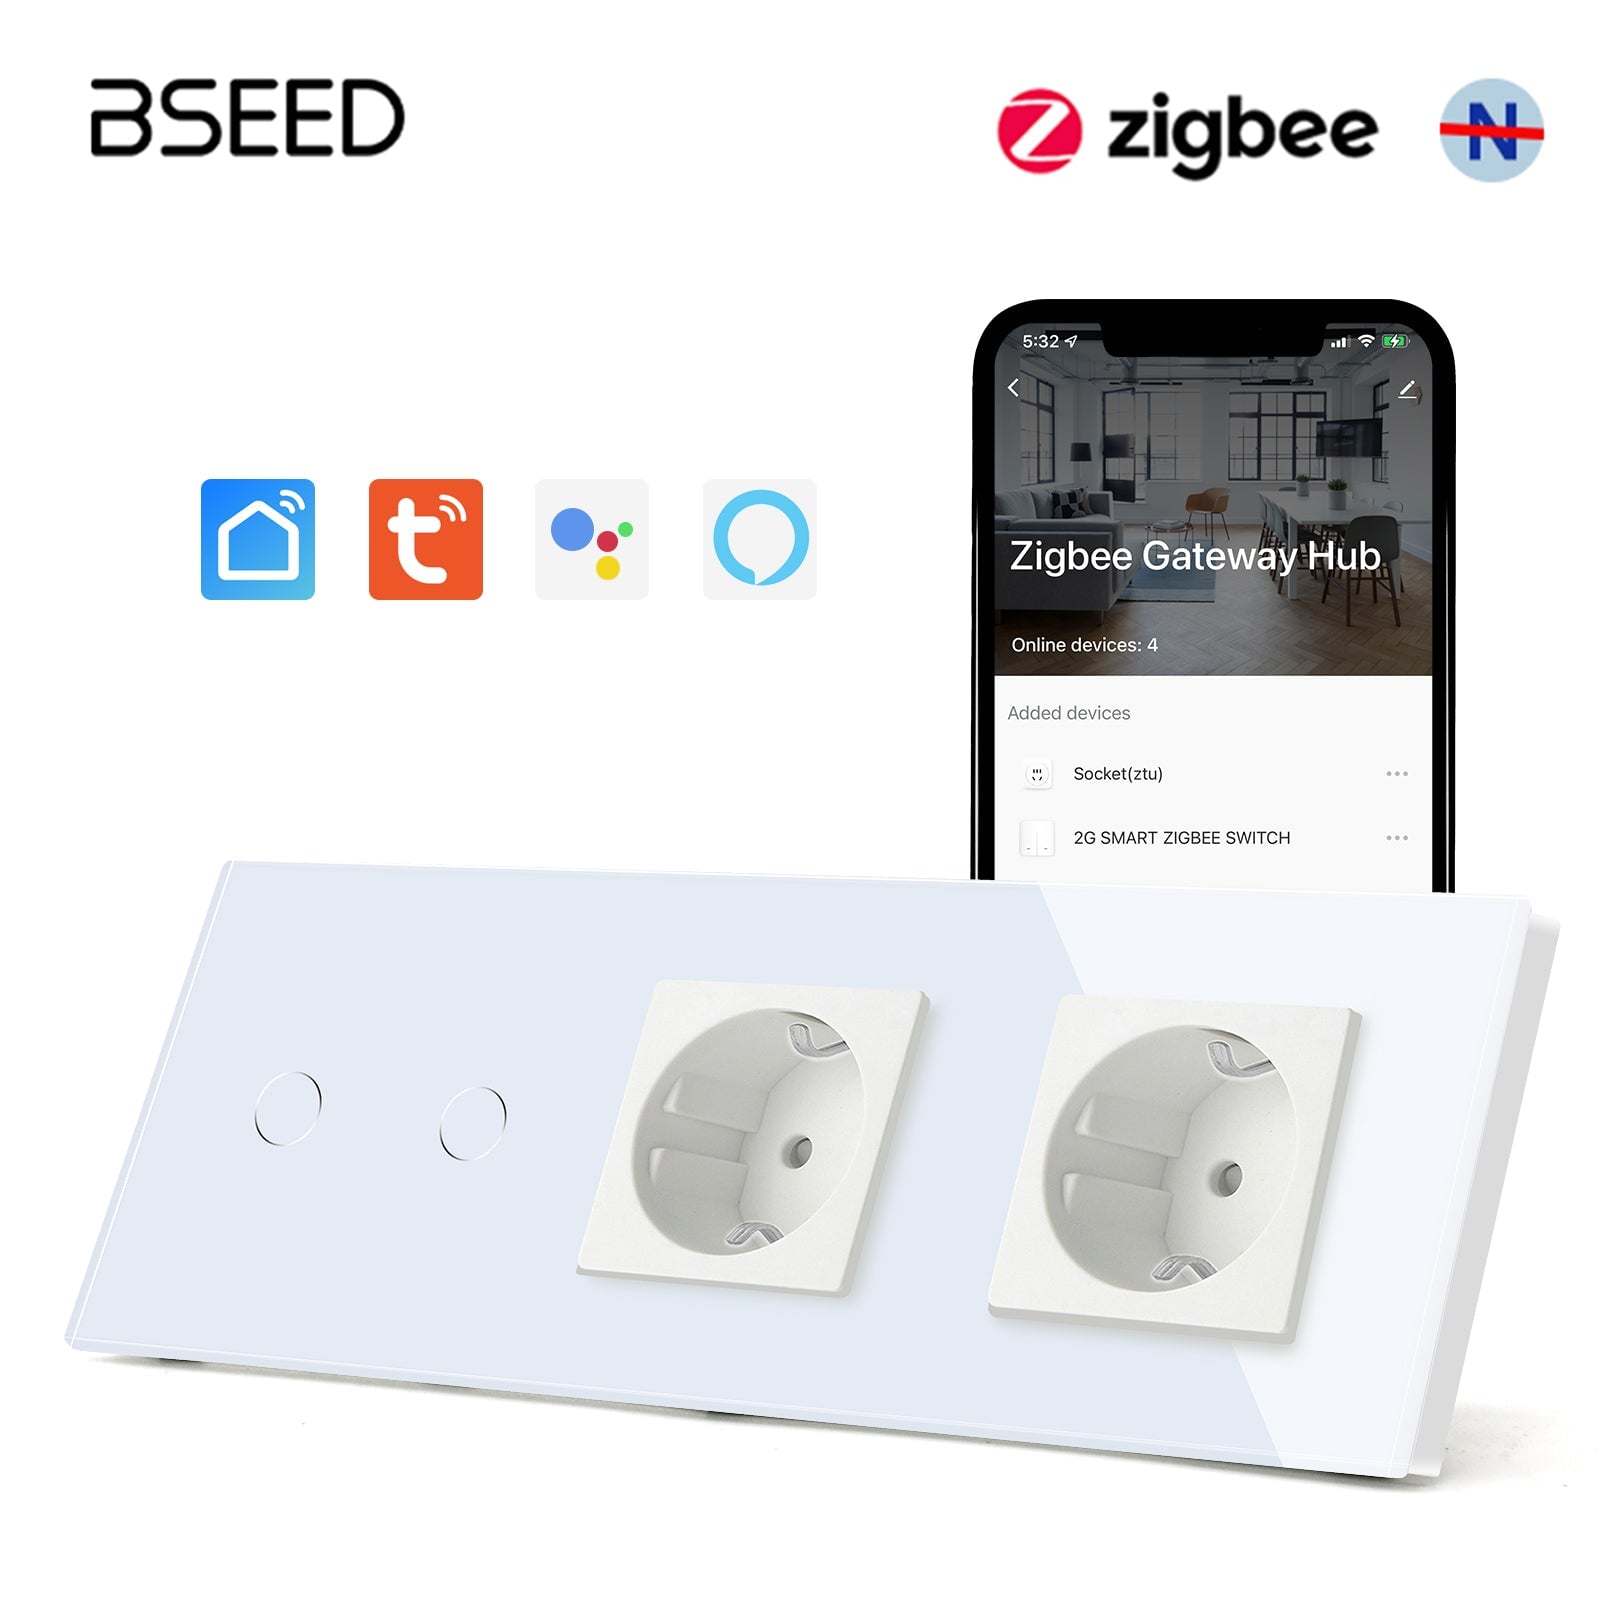 Bseed Zigbee Touch 1/2/3 Gang Light Switches Single Live Line Multi Control With Double EU Standard Not Smart Wall Sockets Light Switches Bseedswitch White 2Gang 